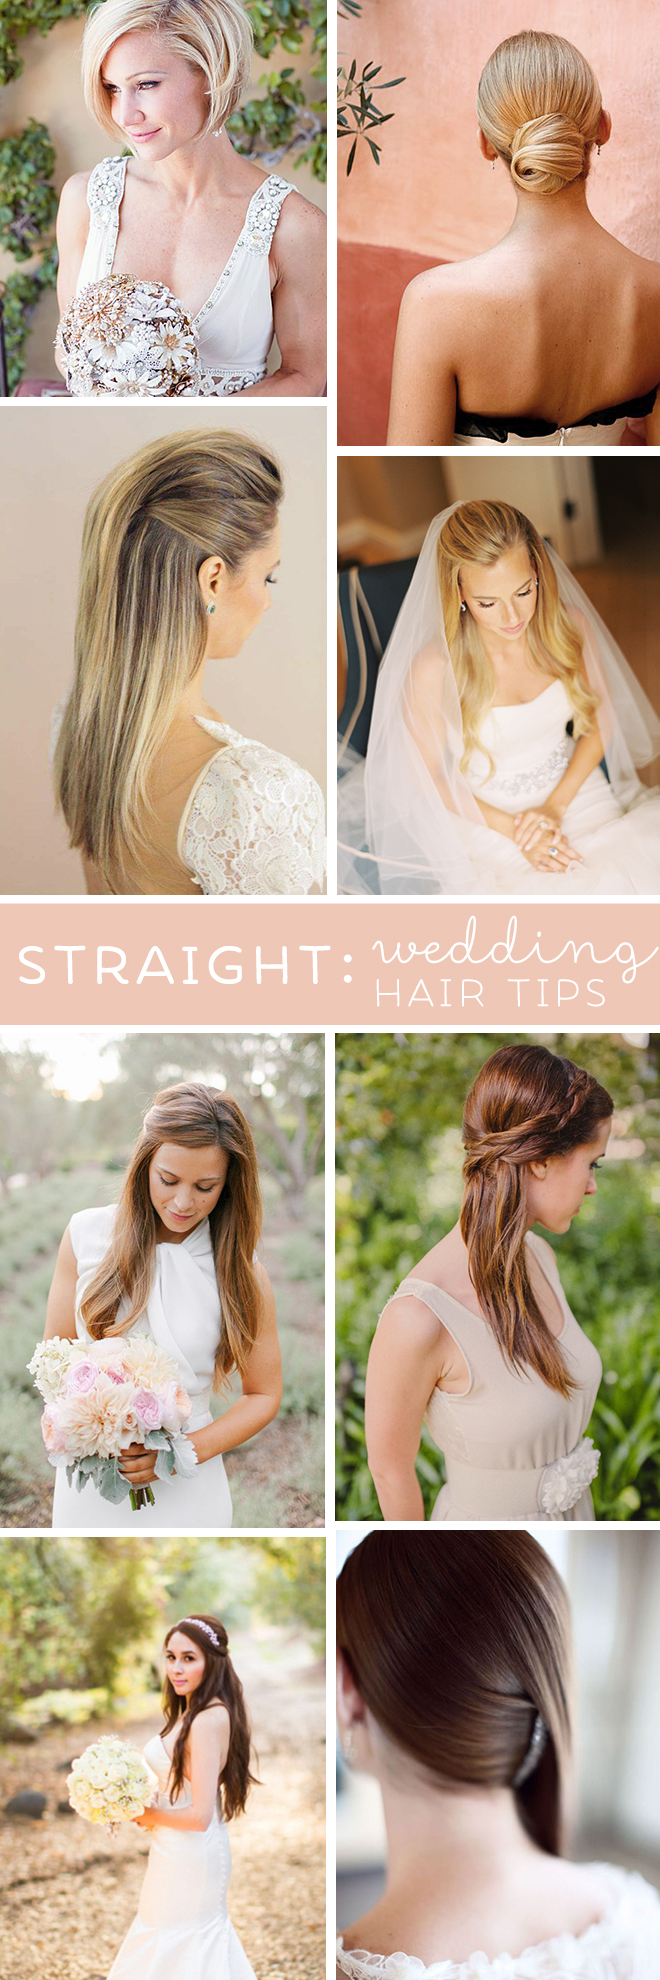 Best Wedding Hair Tips For Wearing Straight Styles!